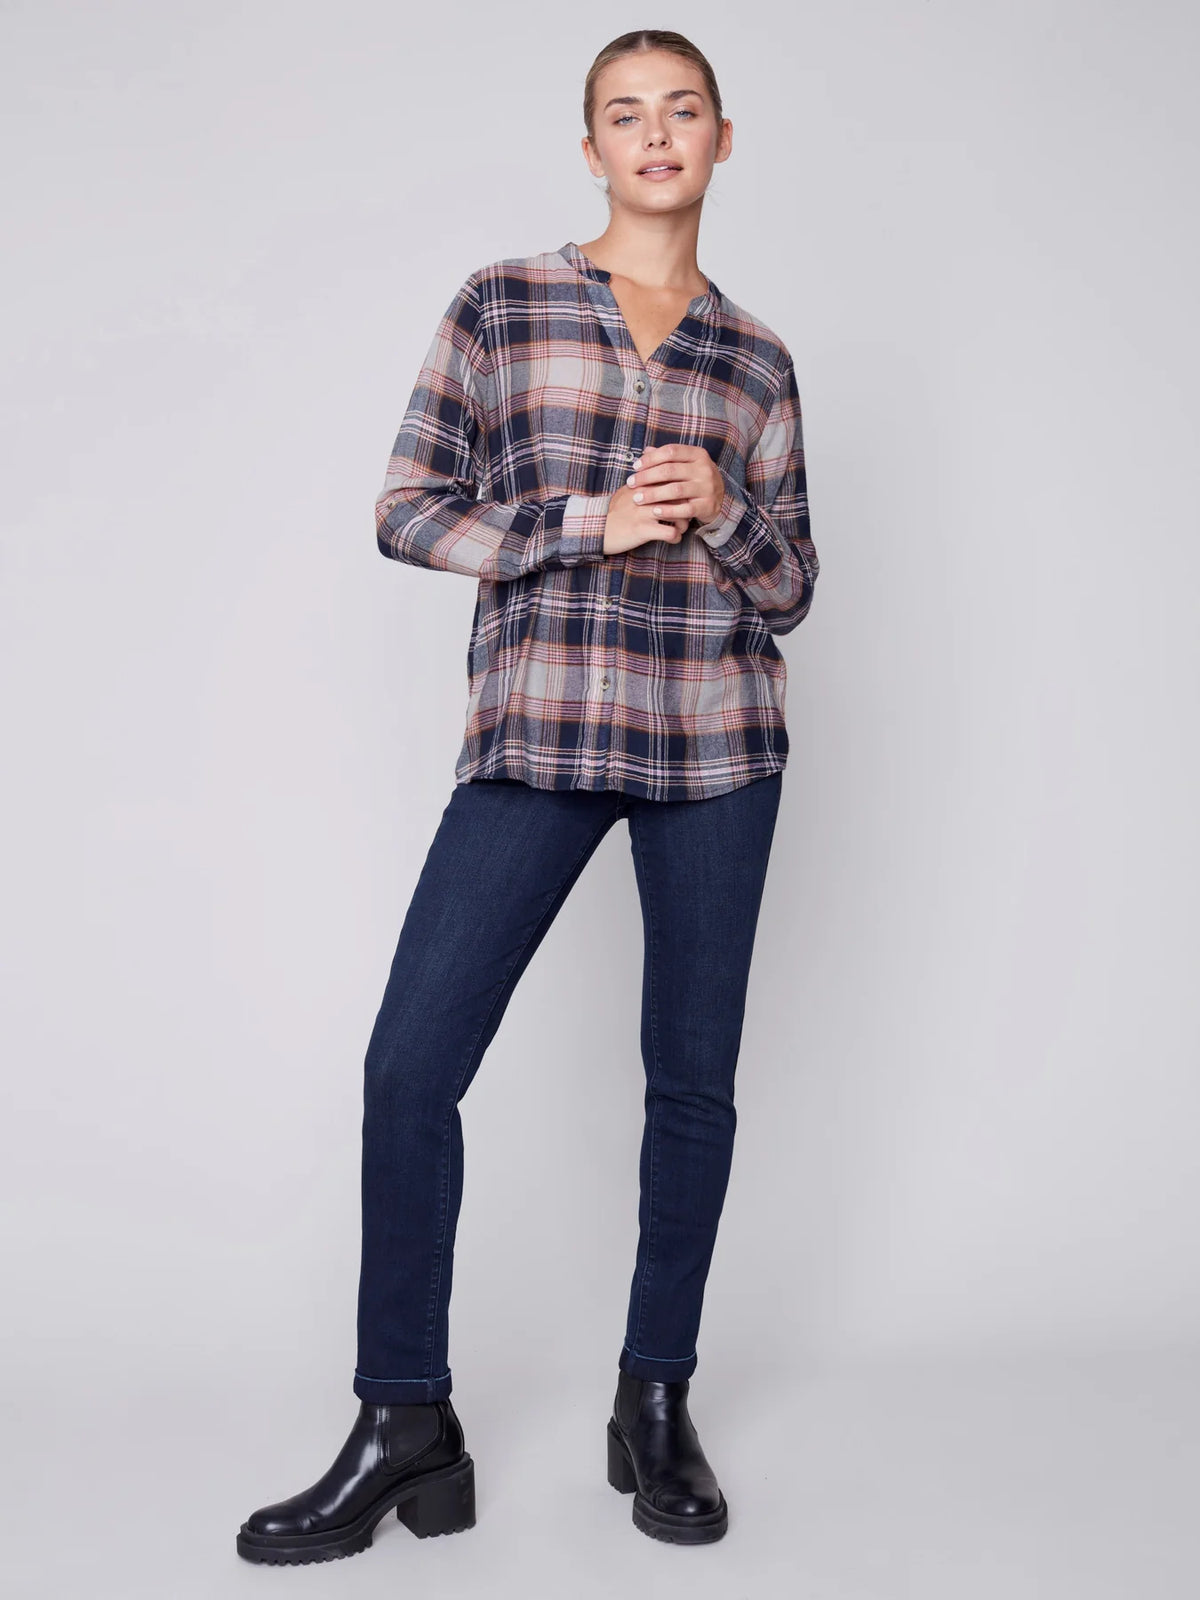 Plaid Shirt W/Rounded Collar